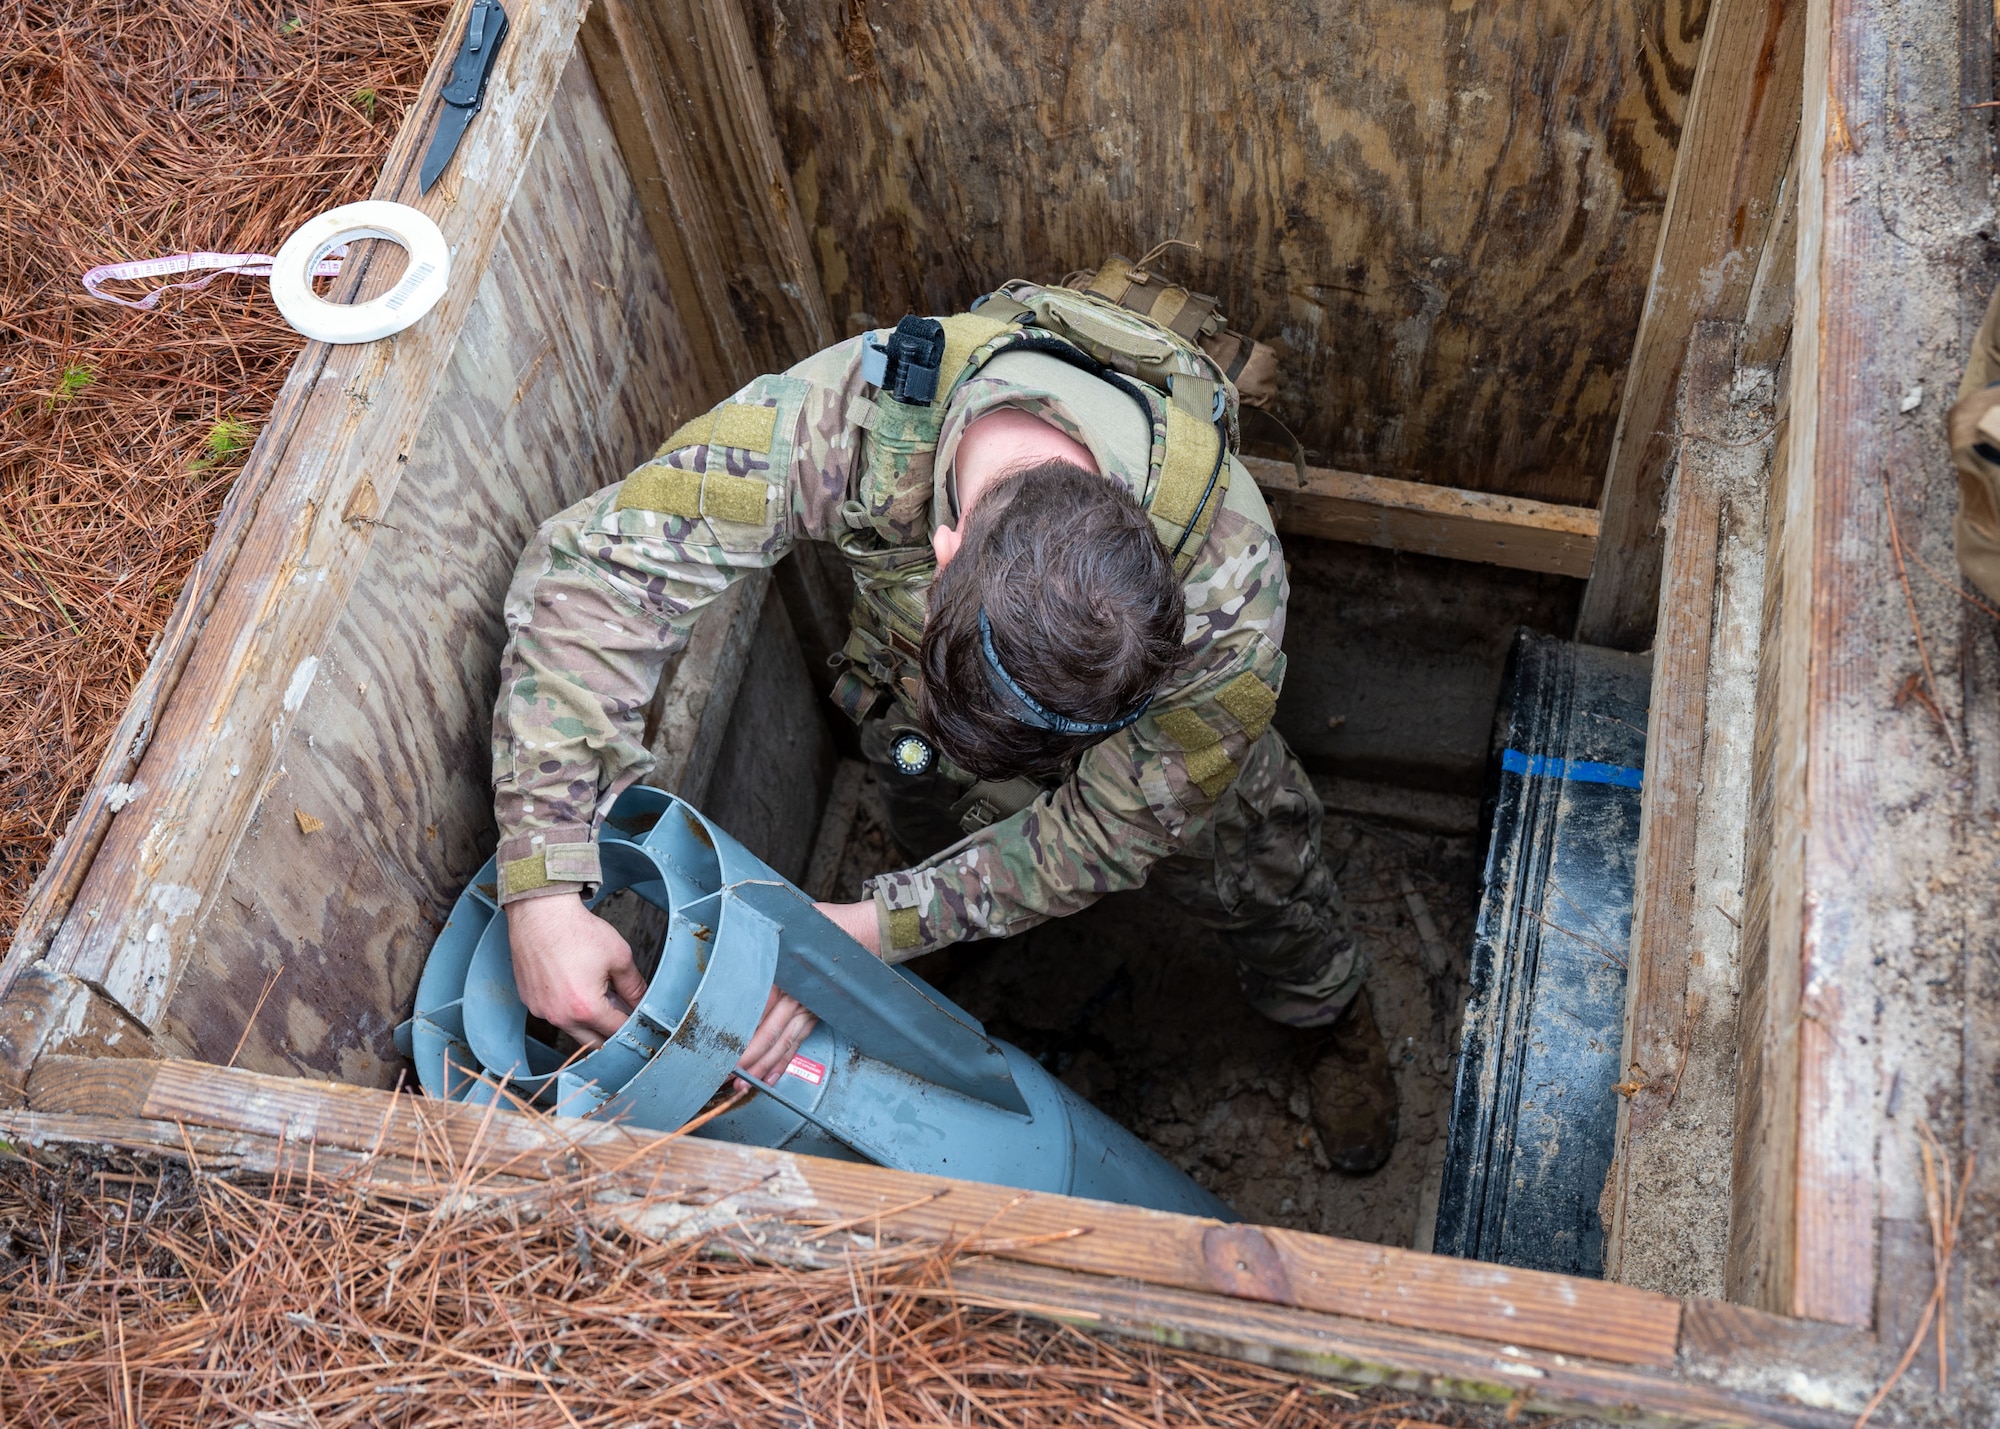 A man in a hole examines a training ordnance within the hole.